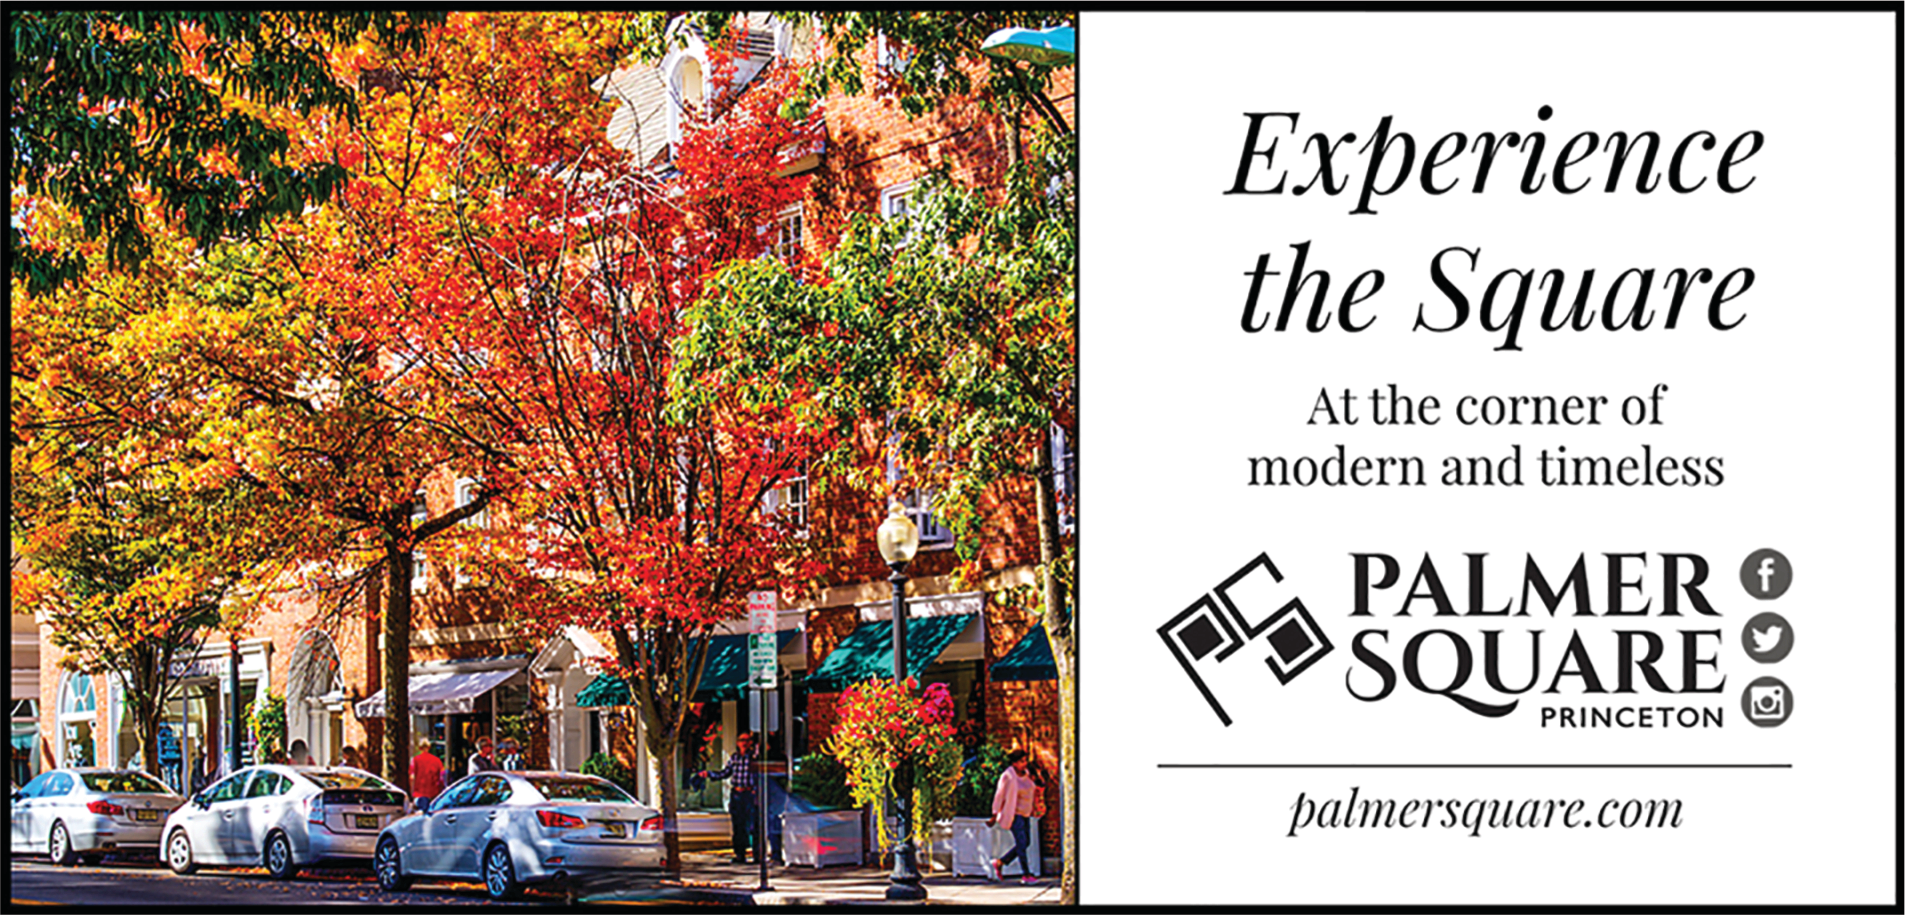 Palmer Square Shopping & Eateries Print Ad